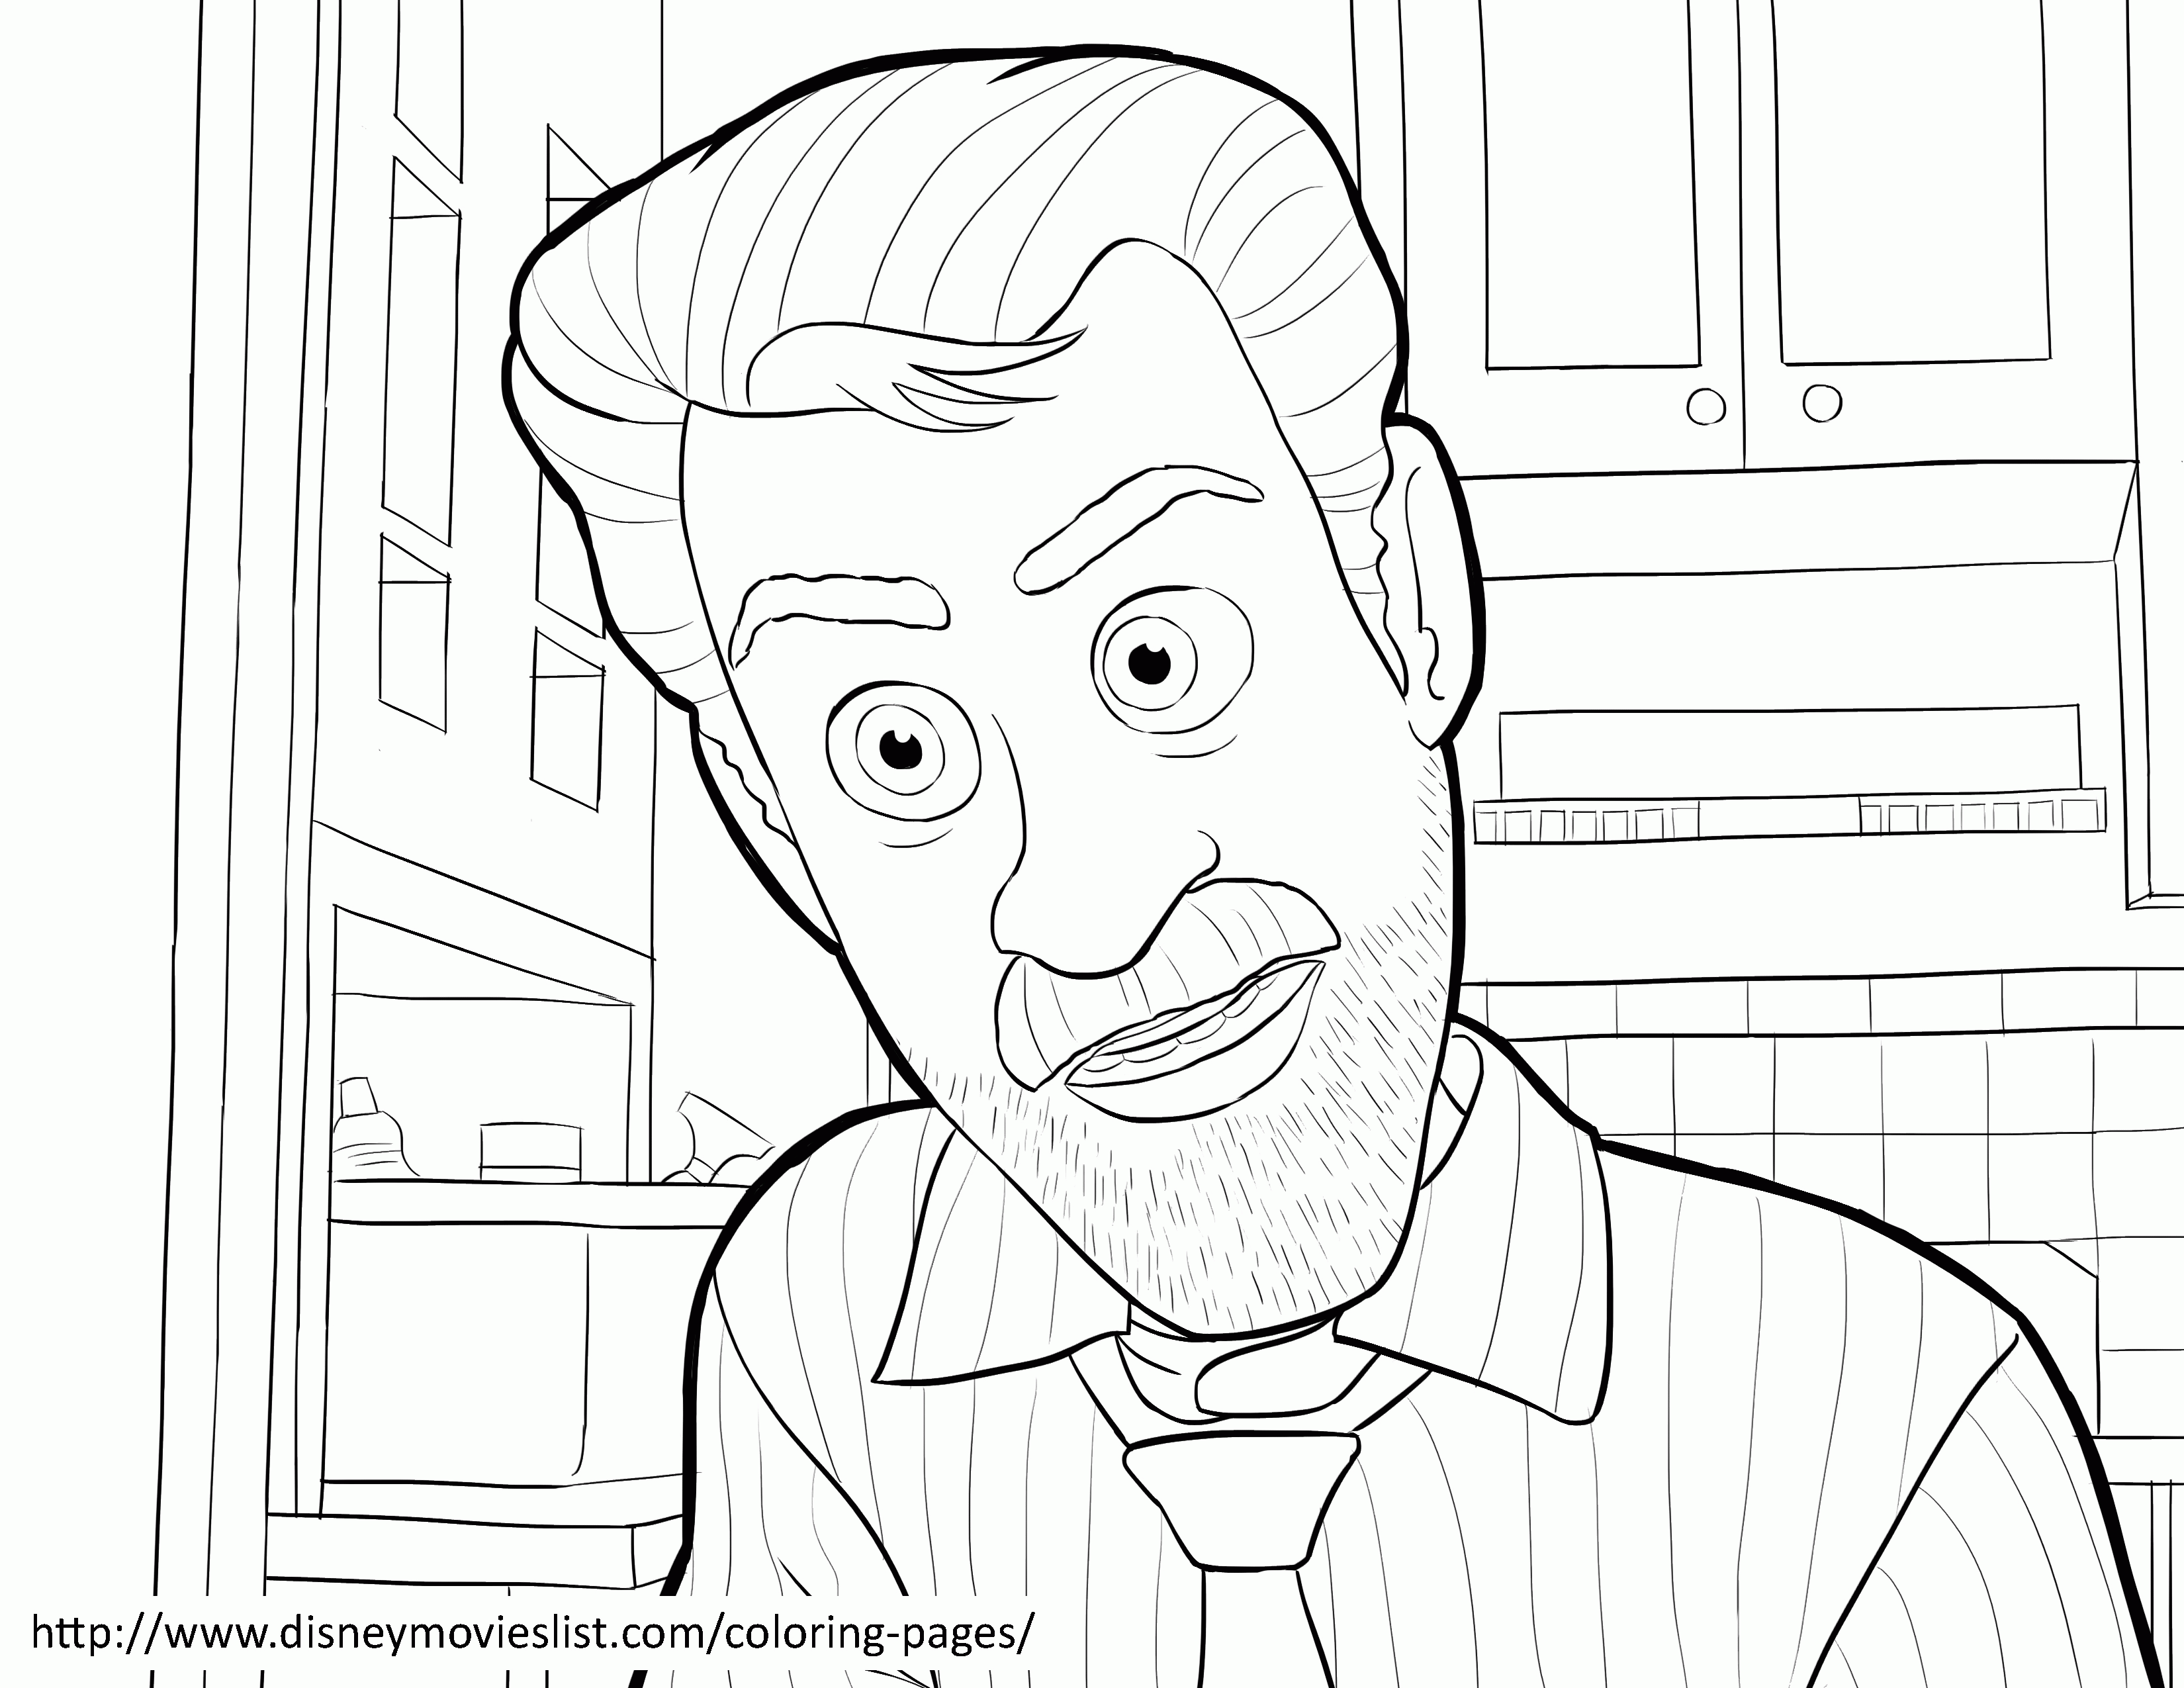 Riley Dad - Disney's Inside Out Coloring Page